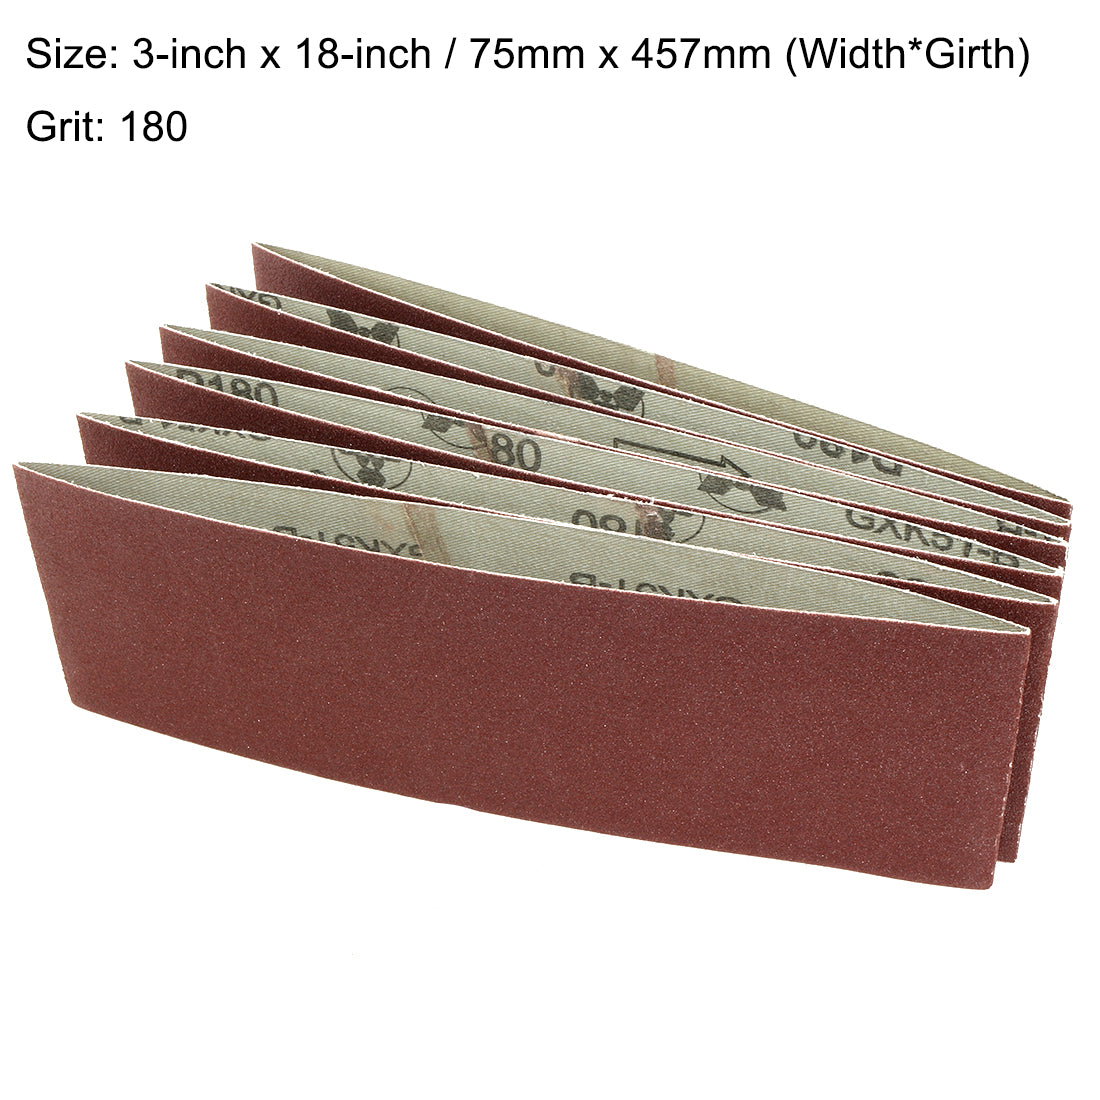 uxcell Uxcell 3-Inch x 18-Inch Aluminum Oxide Sanding Belt 180 Grits Lapped Joint 6pcs